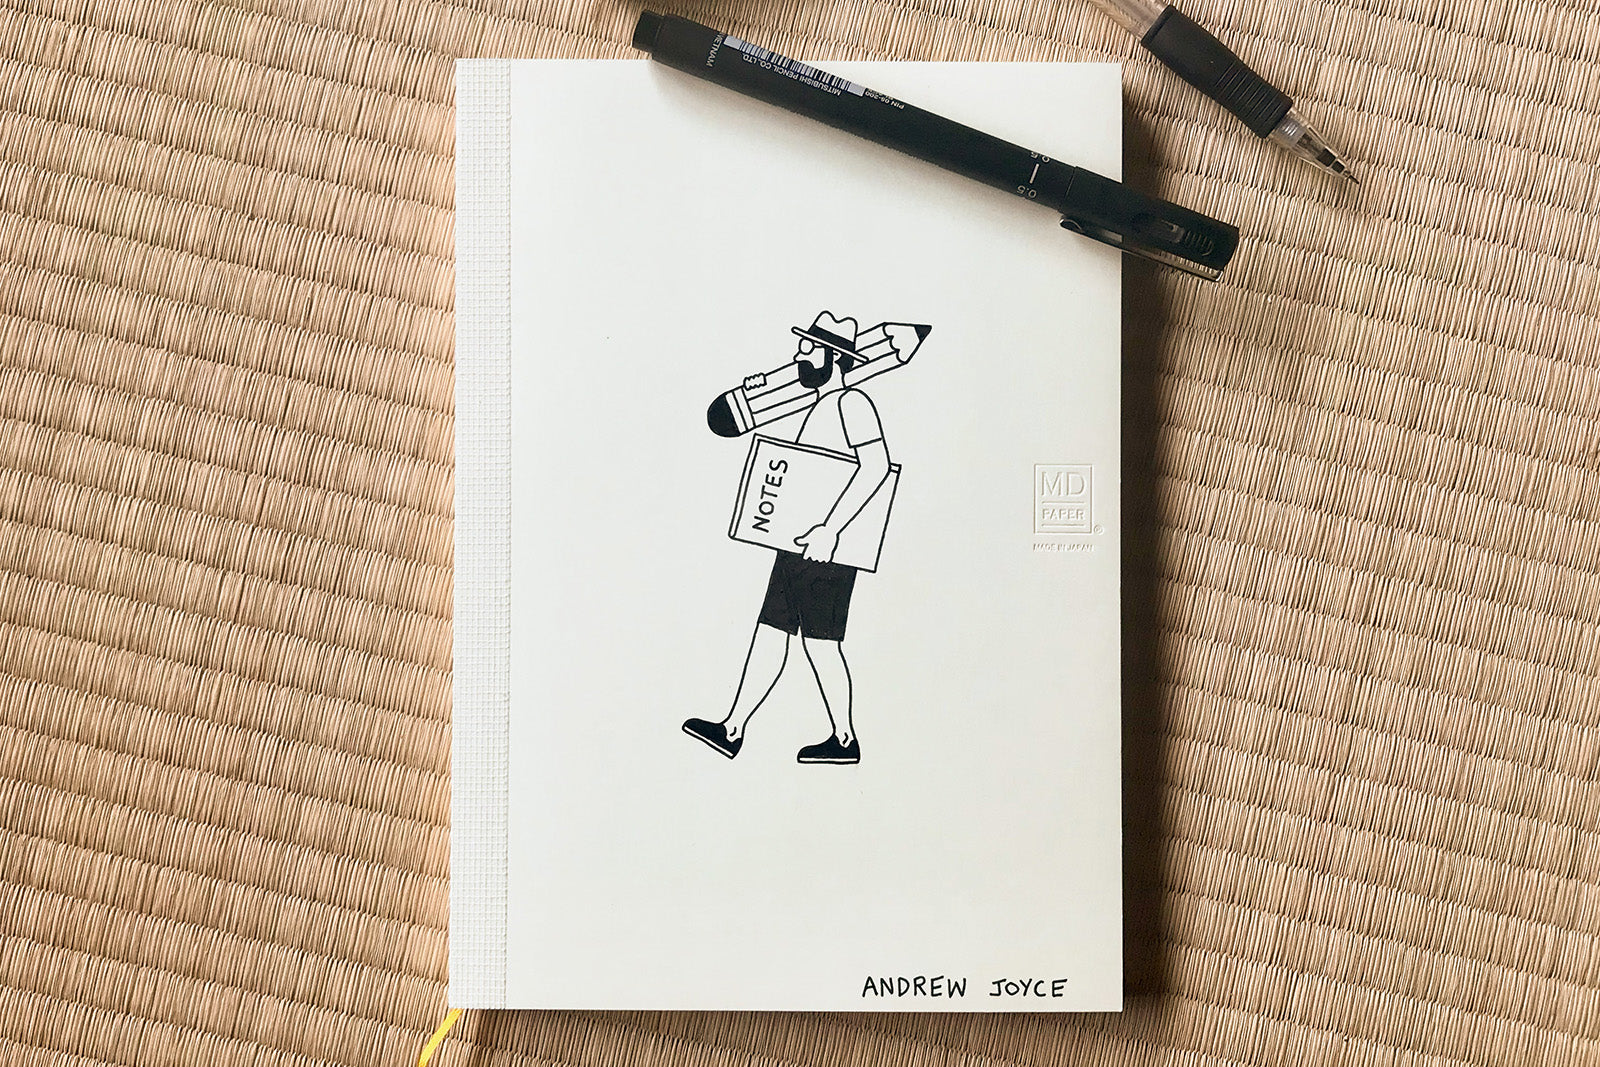 MD [Limited Edition] Notebook <A6> Blank 15th Andrew Joyce